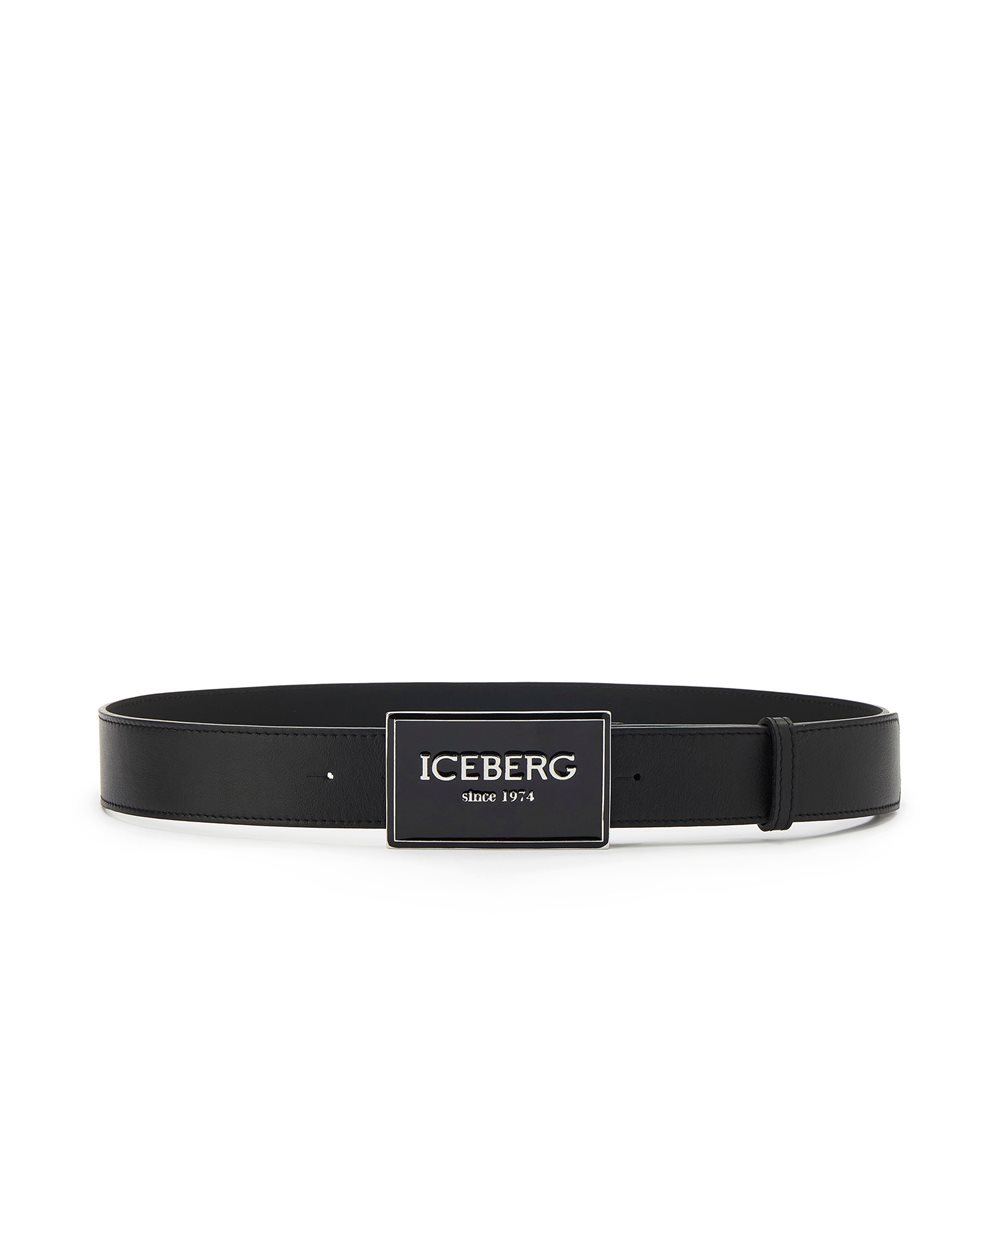 Leather belt with logoed buckle -  ( SECONDO STEP DE ) PROMO SALDI UP TO 40% | Iceberg - Official Website